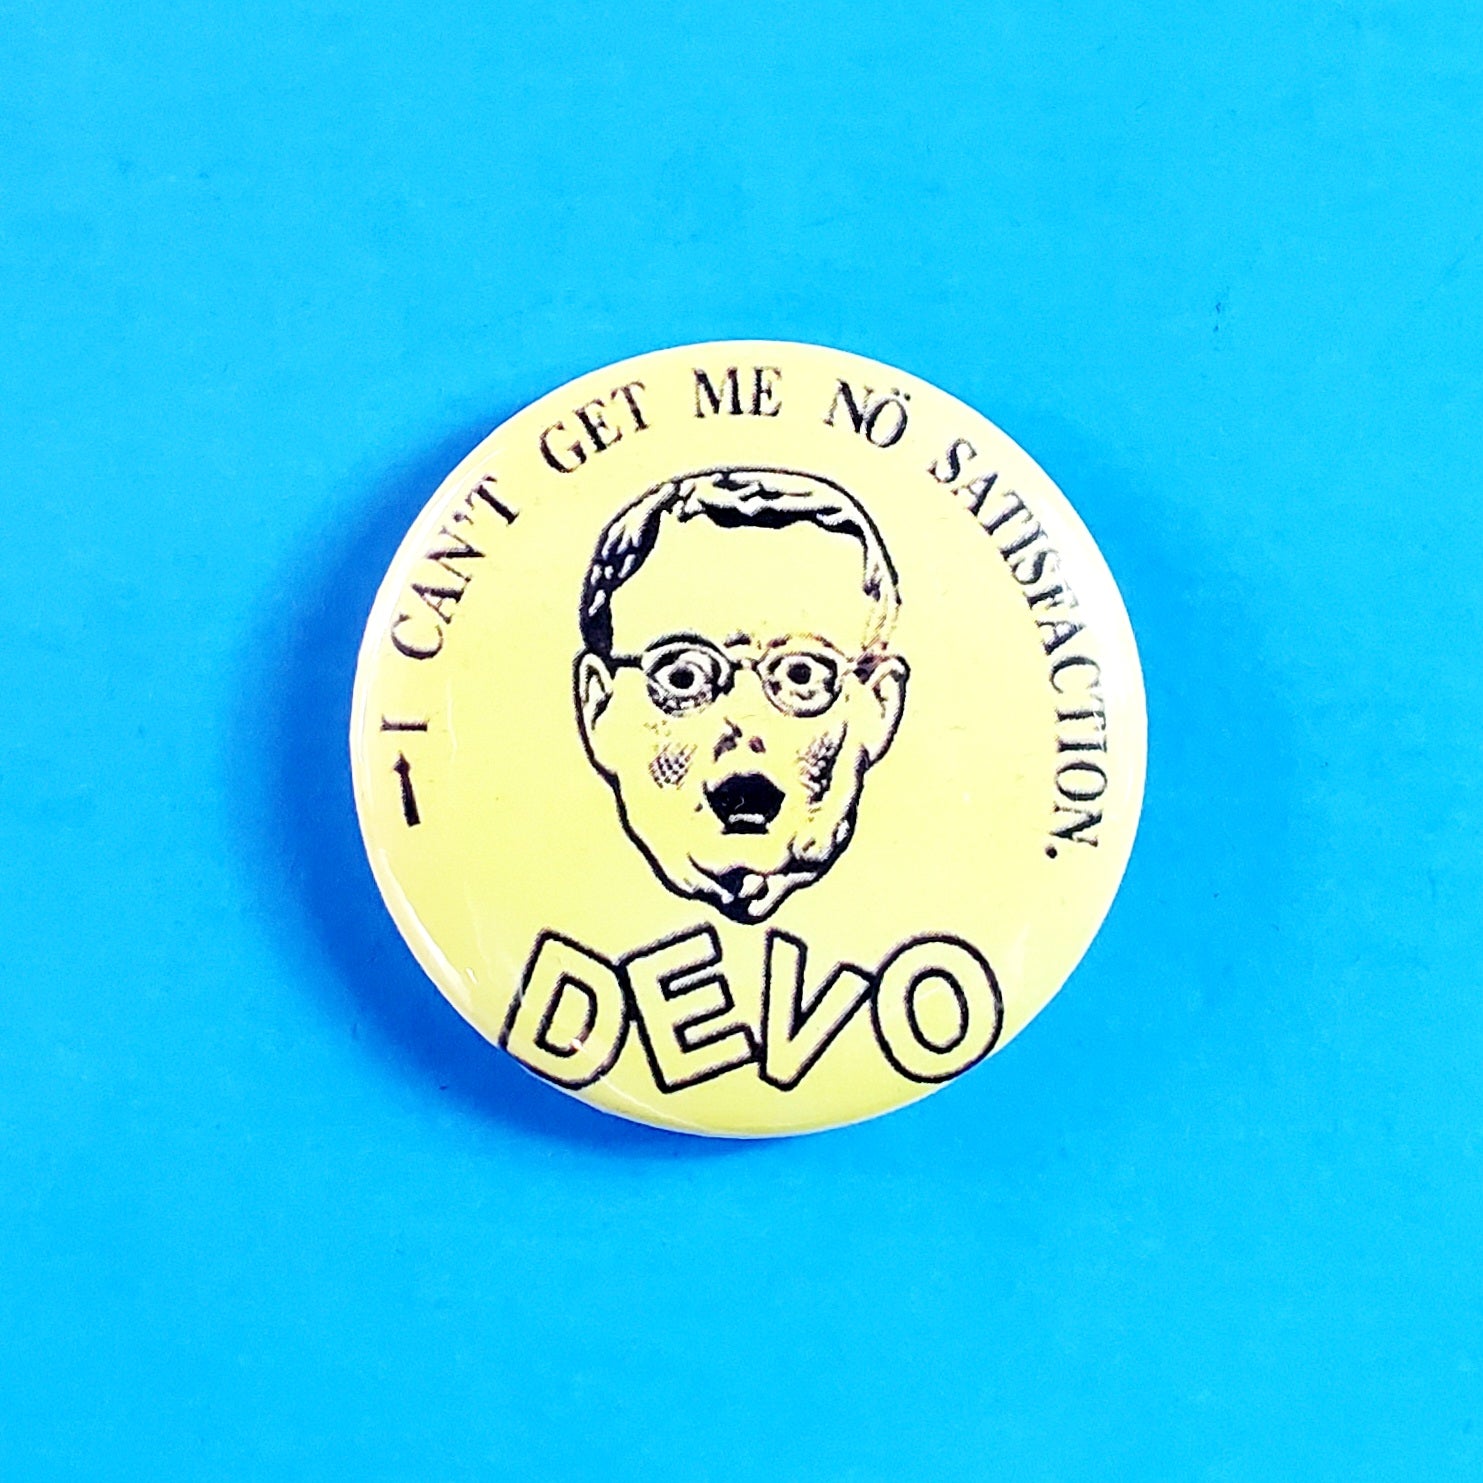 Devo “I Can’t Get Me No Satisfaction” Button